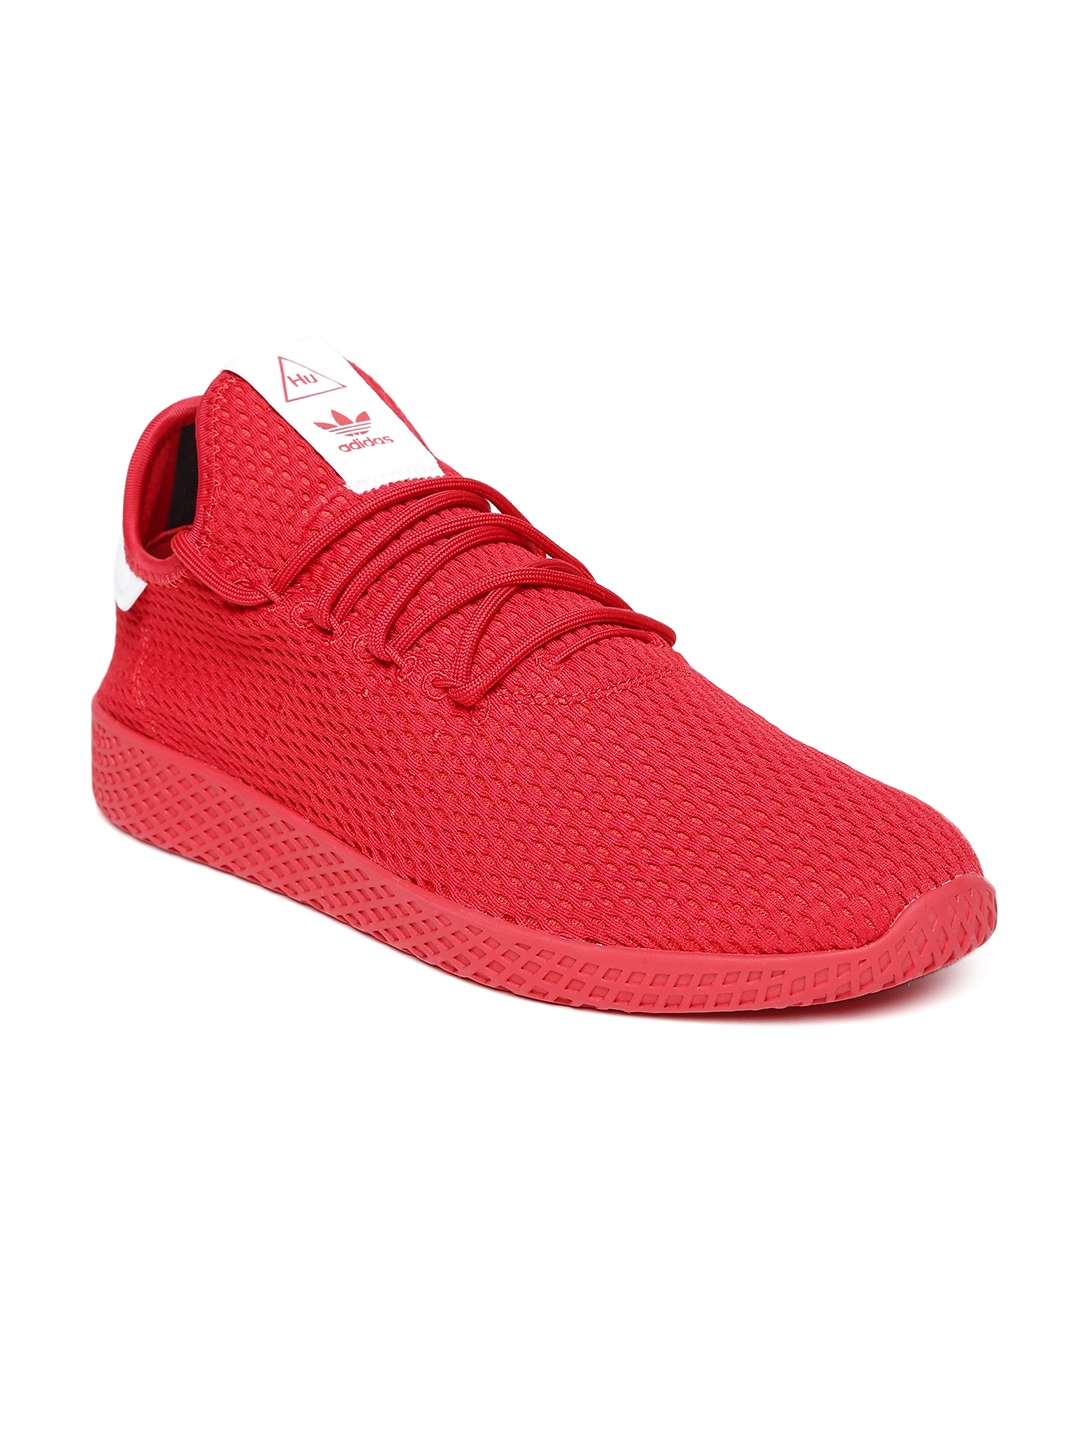 adidas casual shoes red